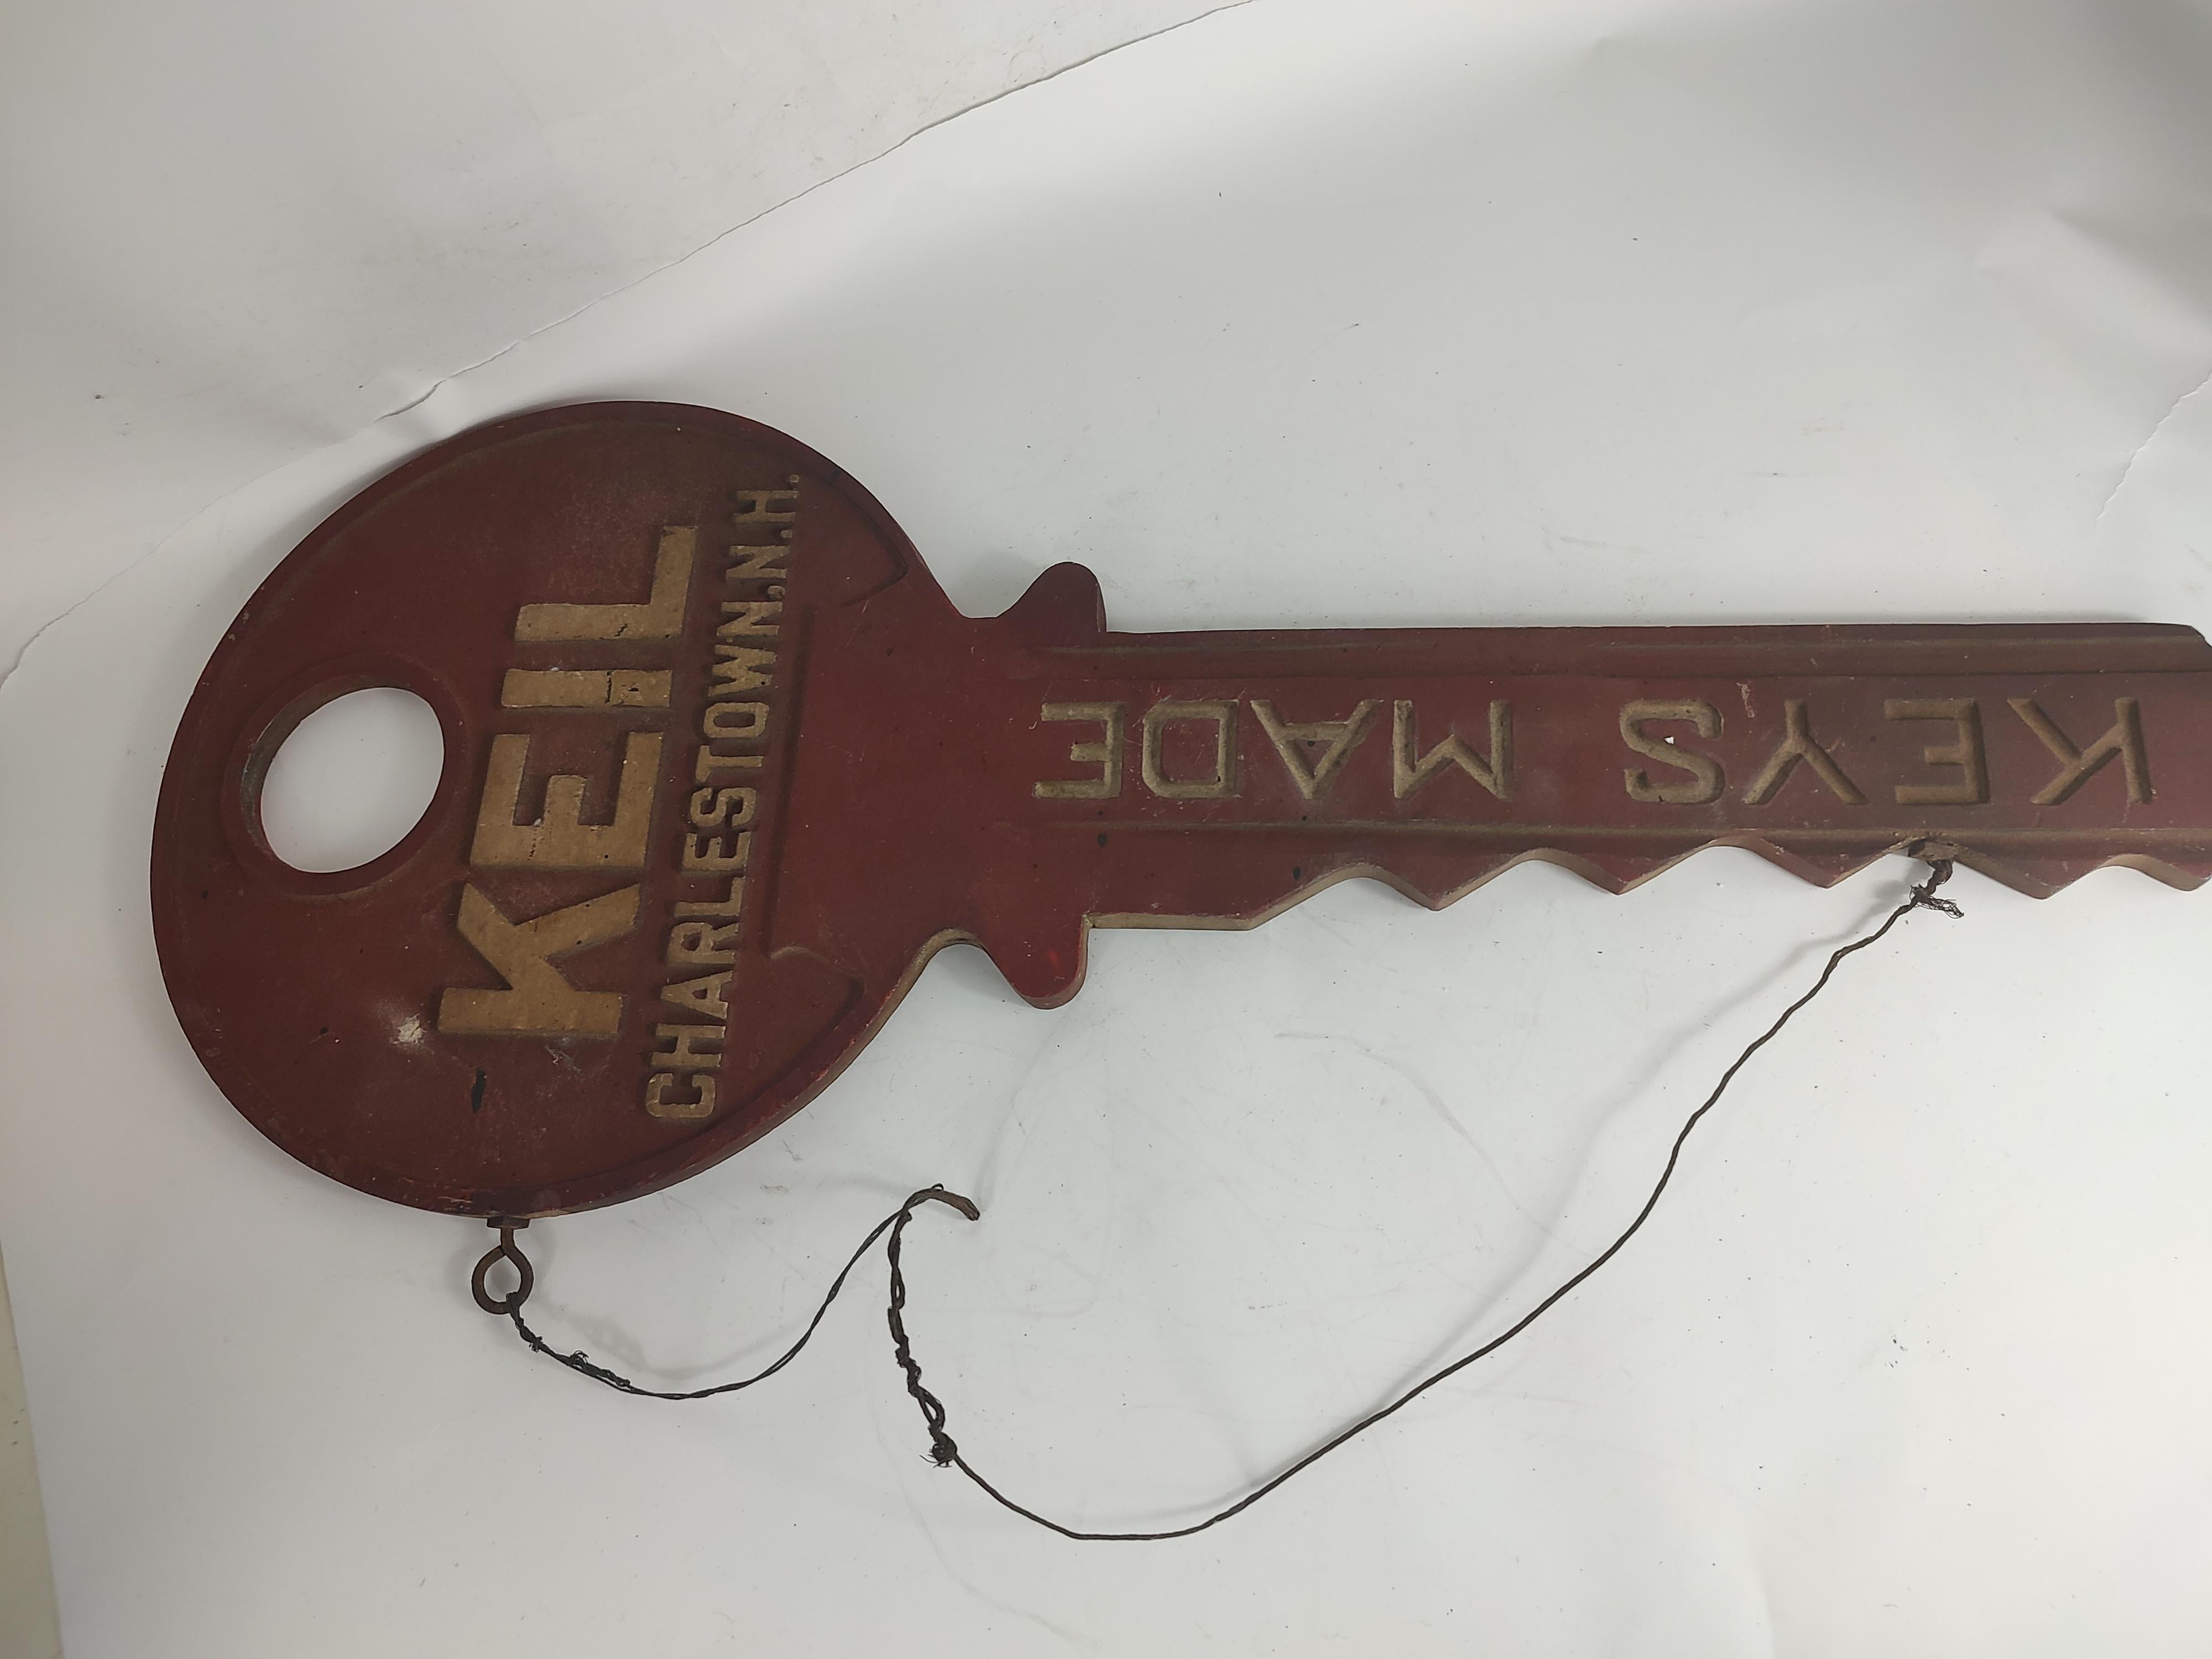 American C1945 Cast Aluminum Trade Sign Form of a Key Keil Charlestown N.H. Keys Made For Sale